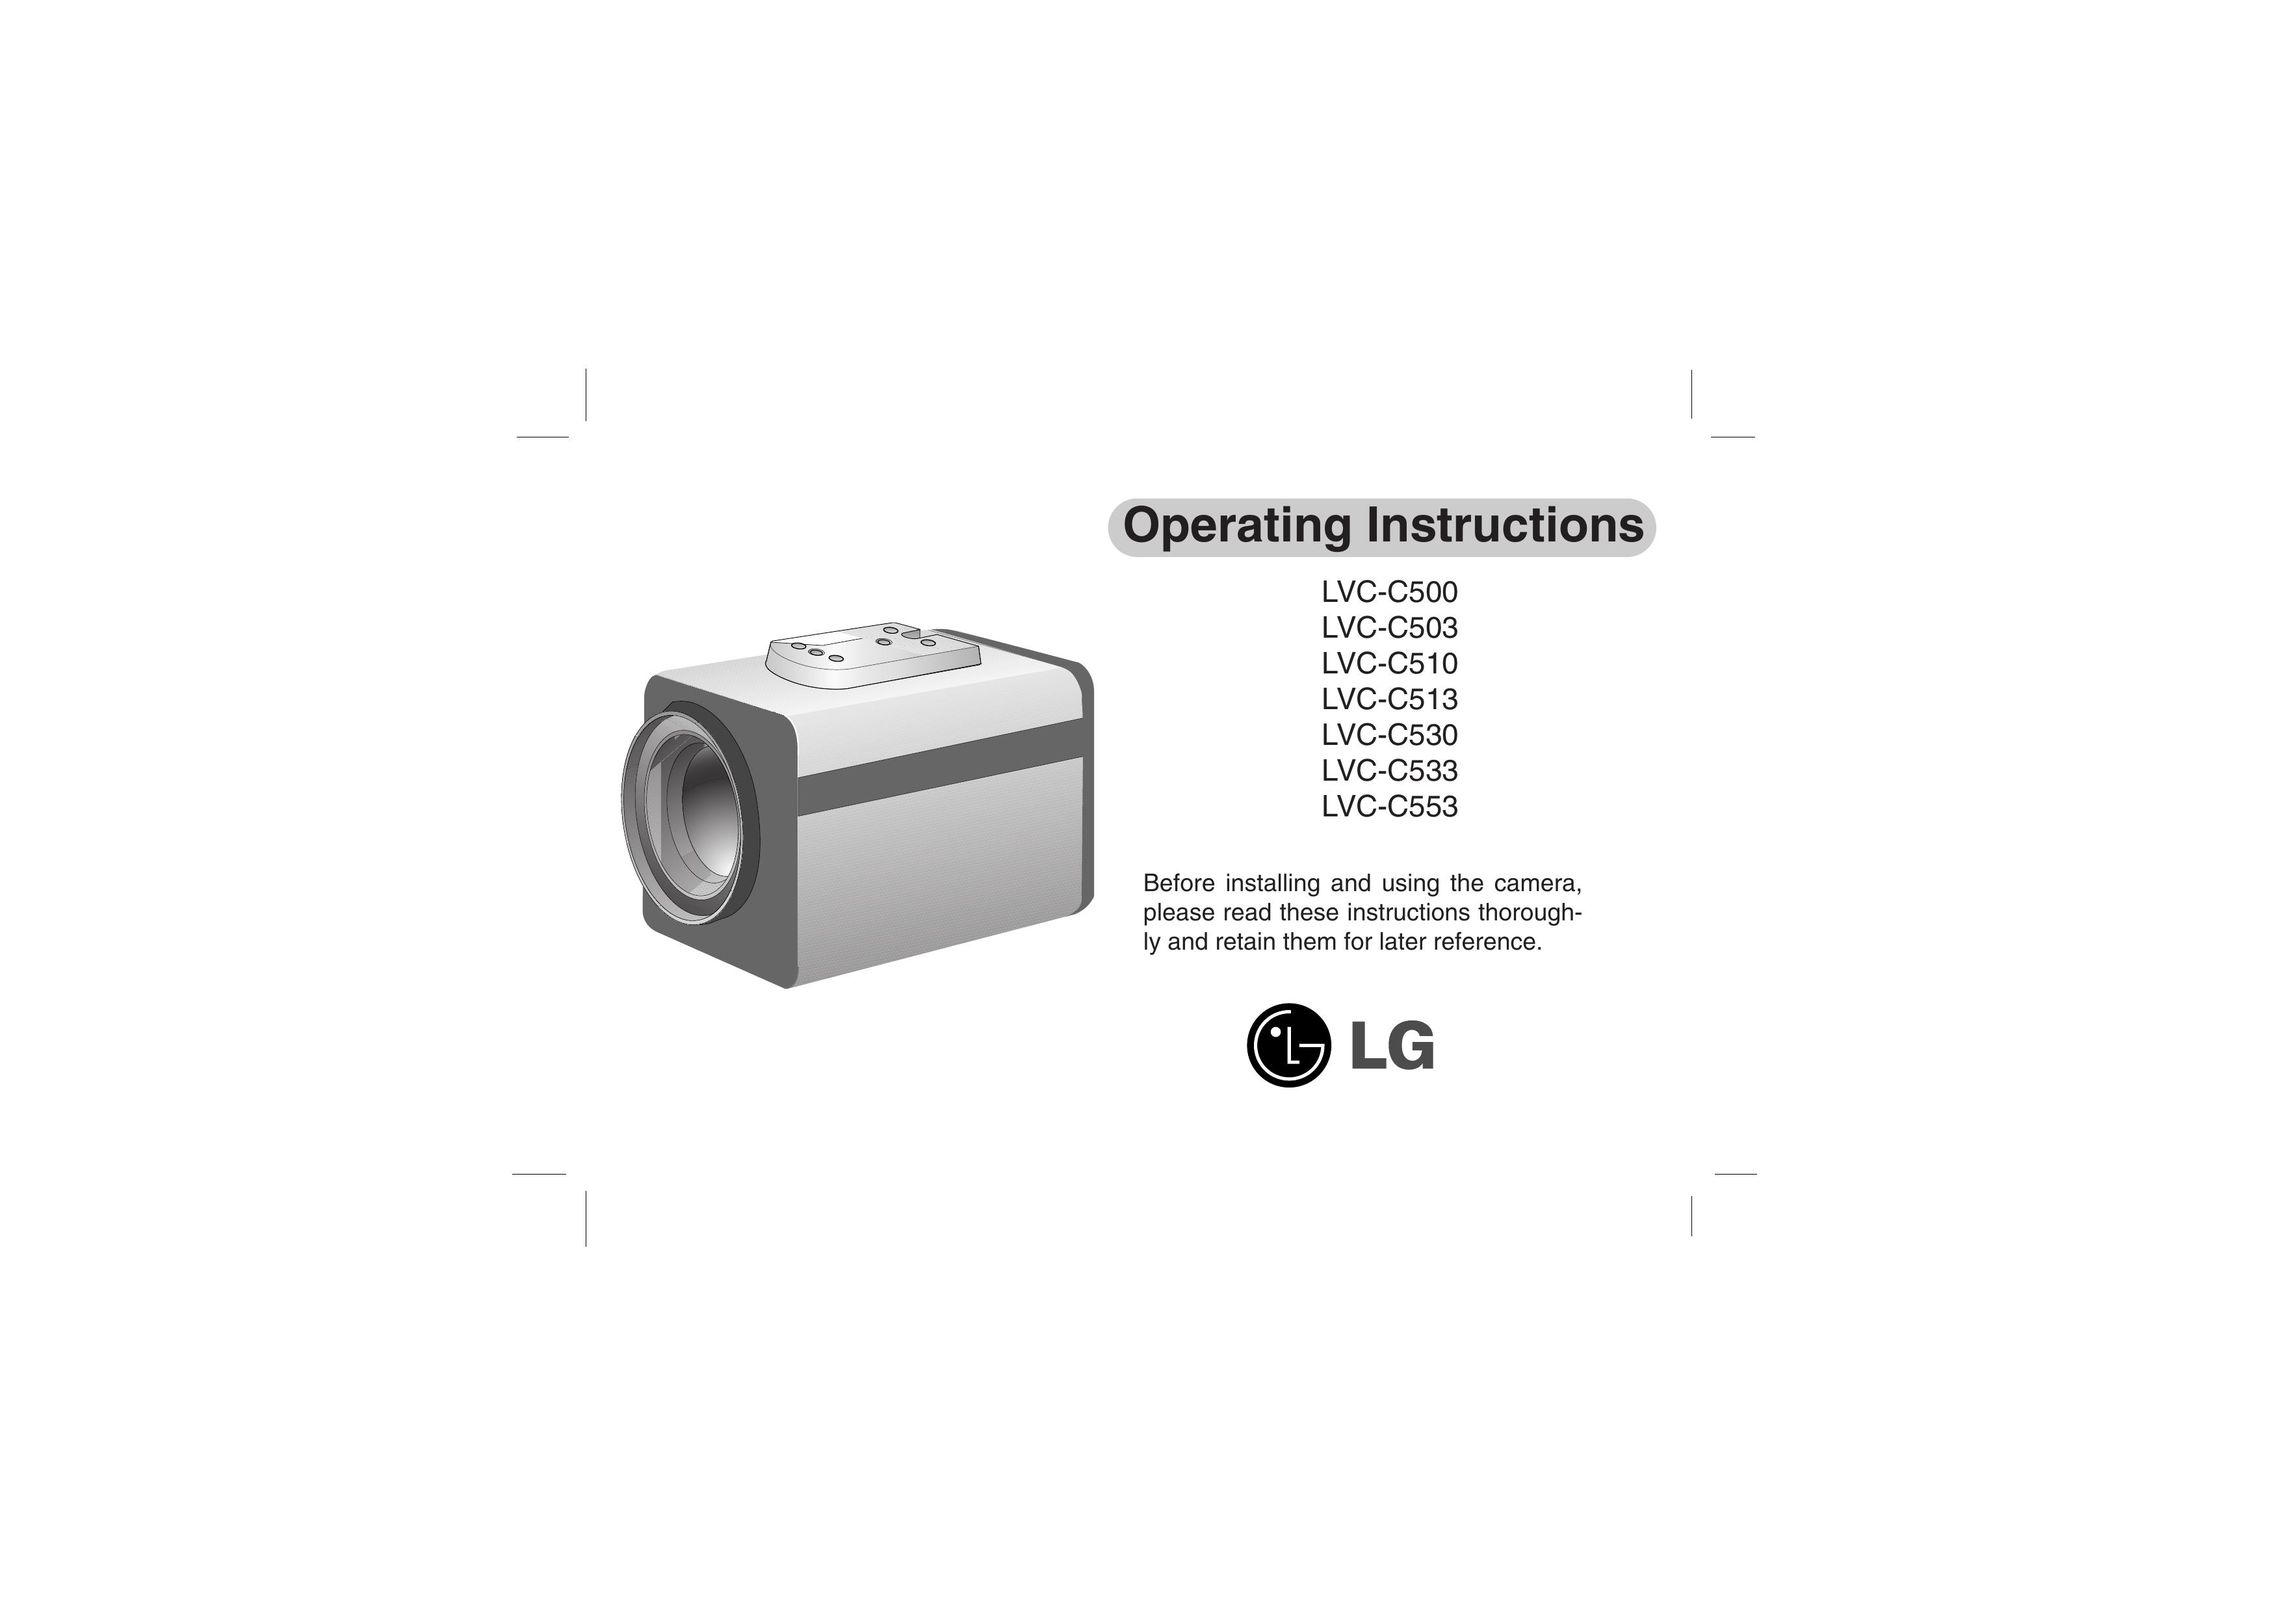 LG Electronics LVC-C513 Home Security System User Manual